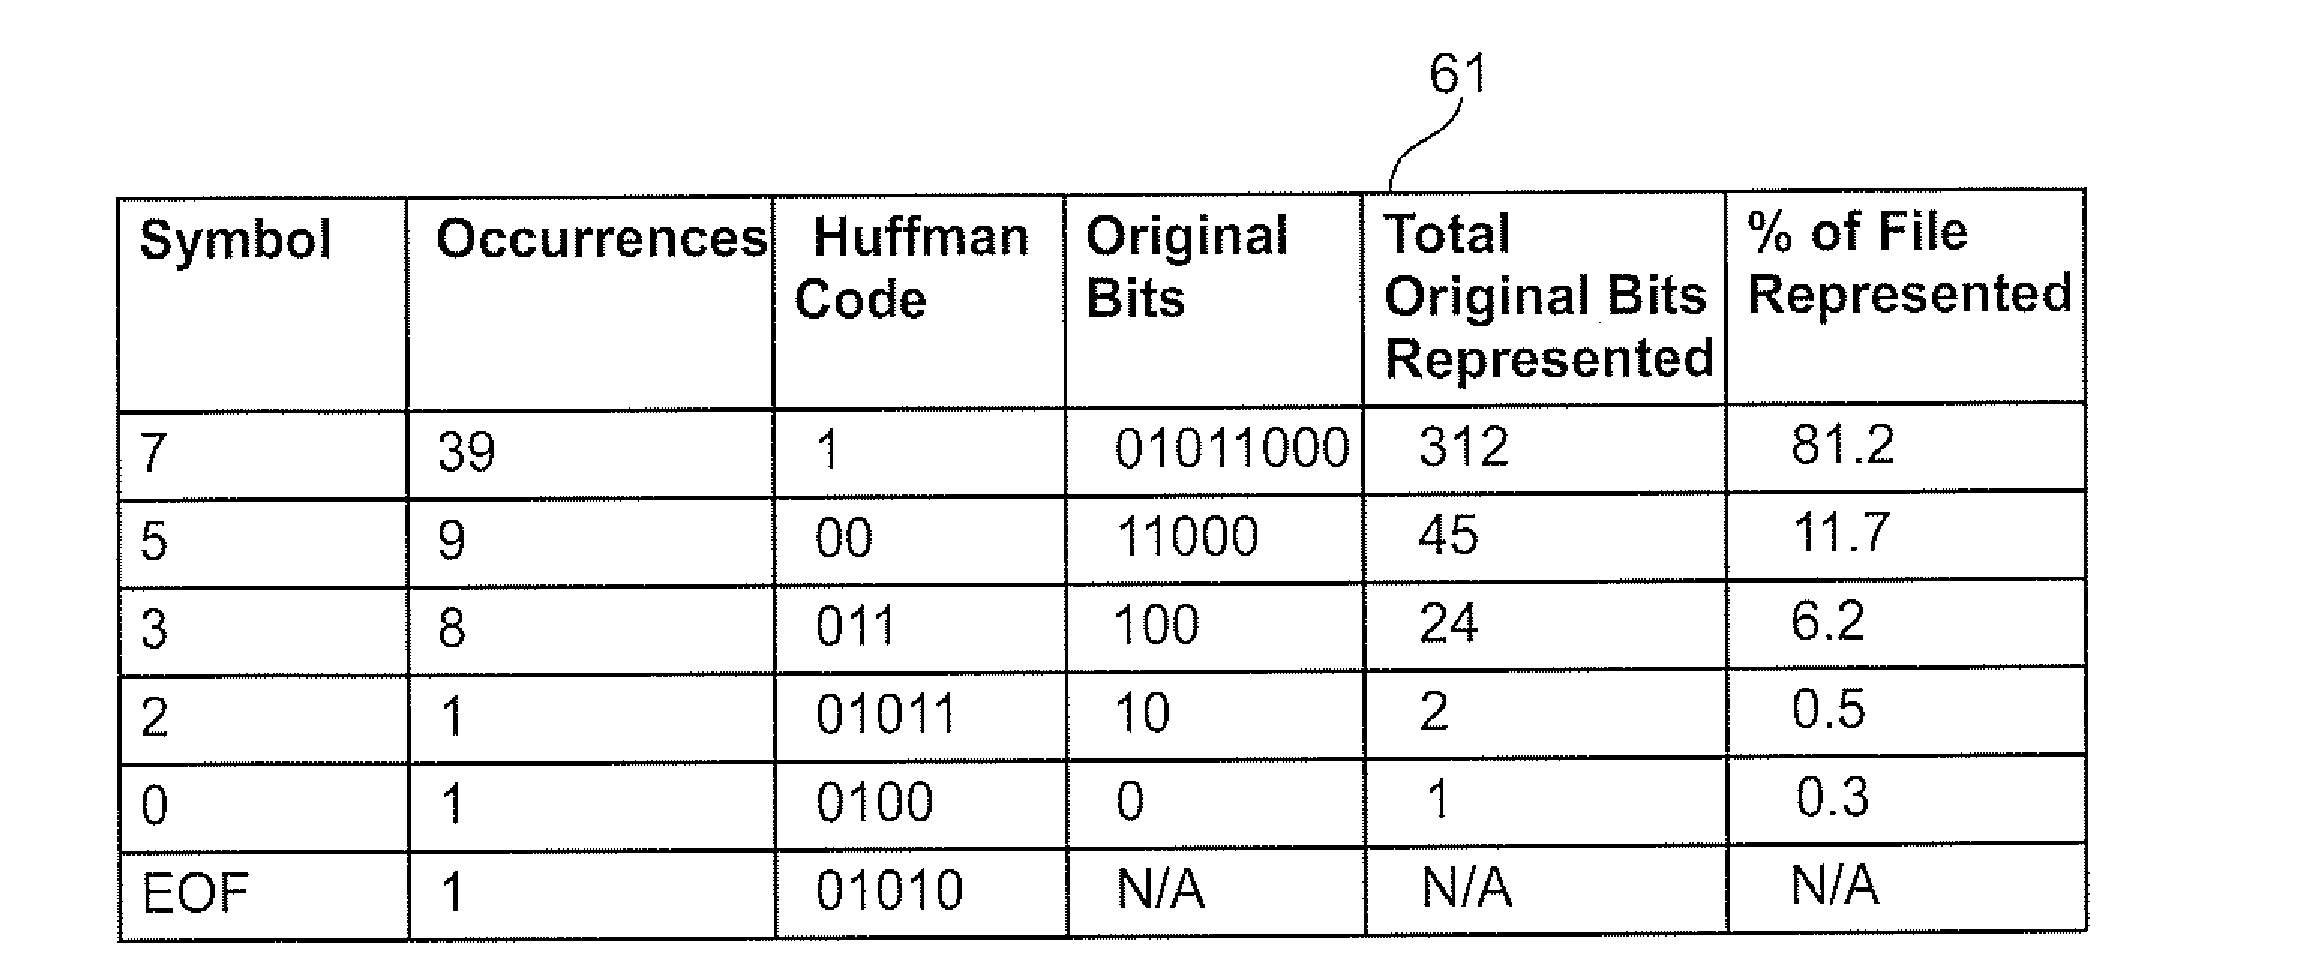 Grouping and Differentiating Files Based on Underlying Grouped and Differentiated Files